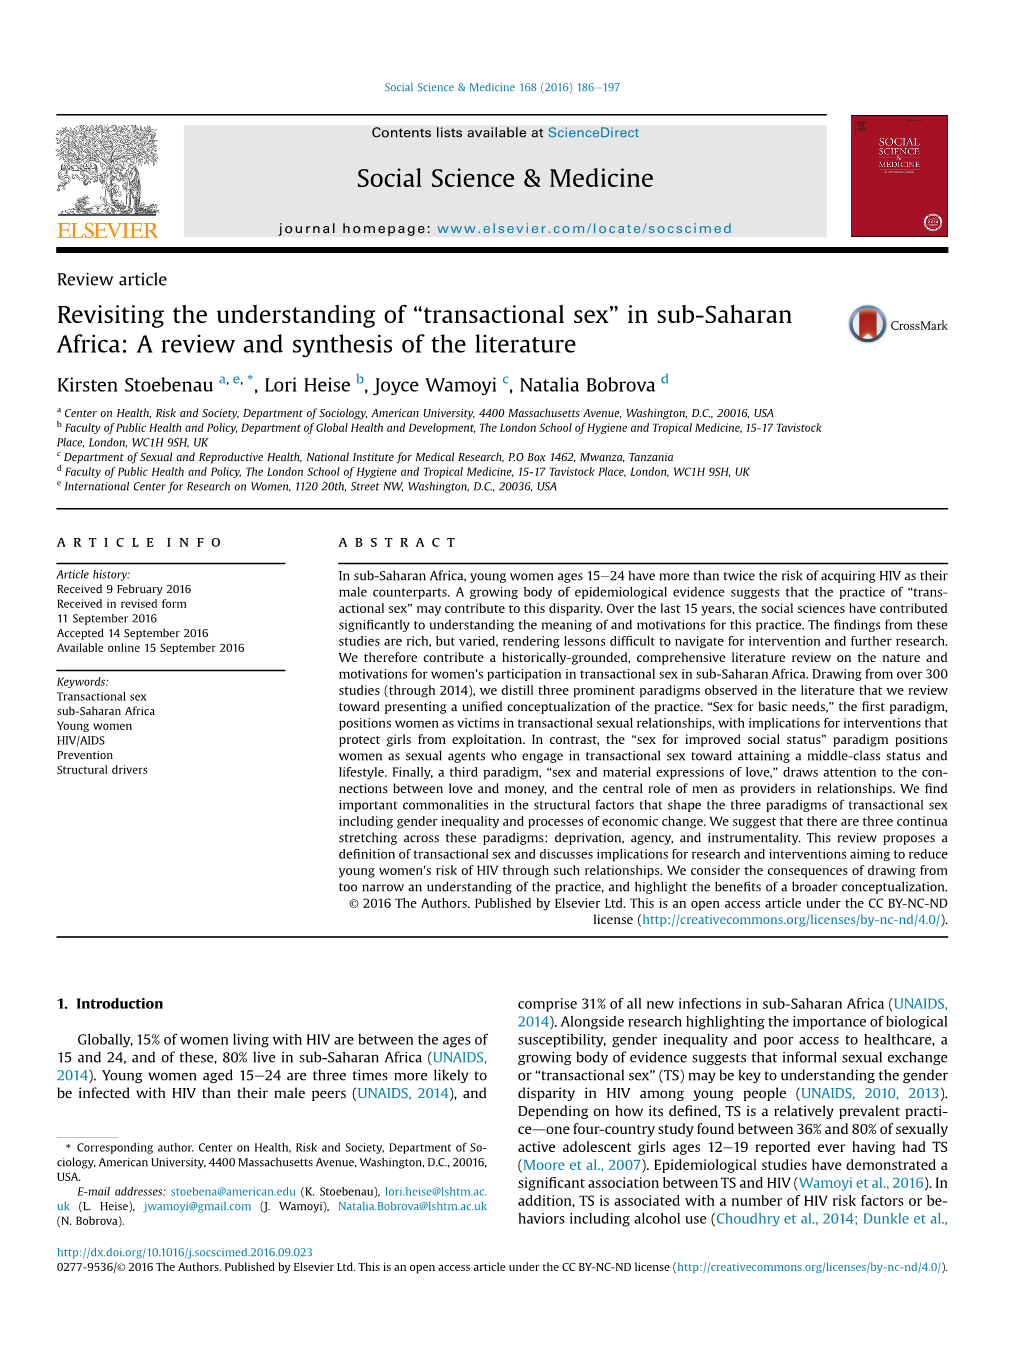 In Sub-Saharan Africa: a Review and Synthesis of the Literature